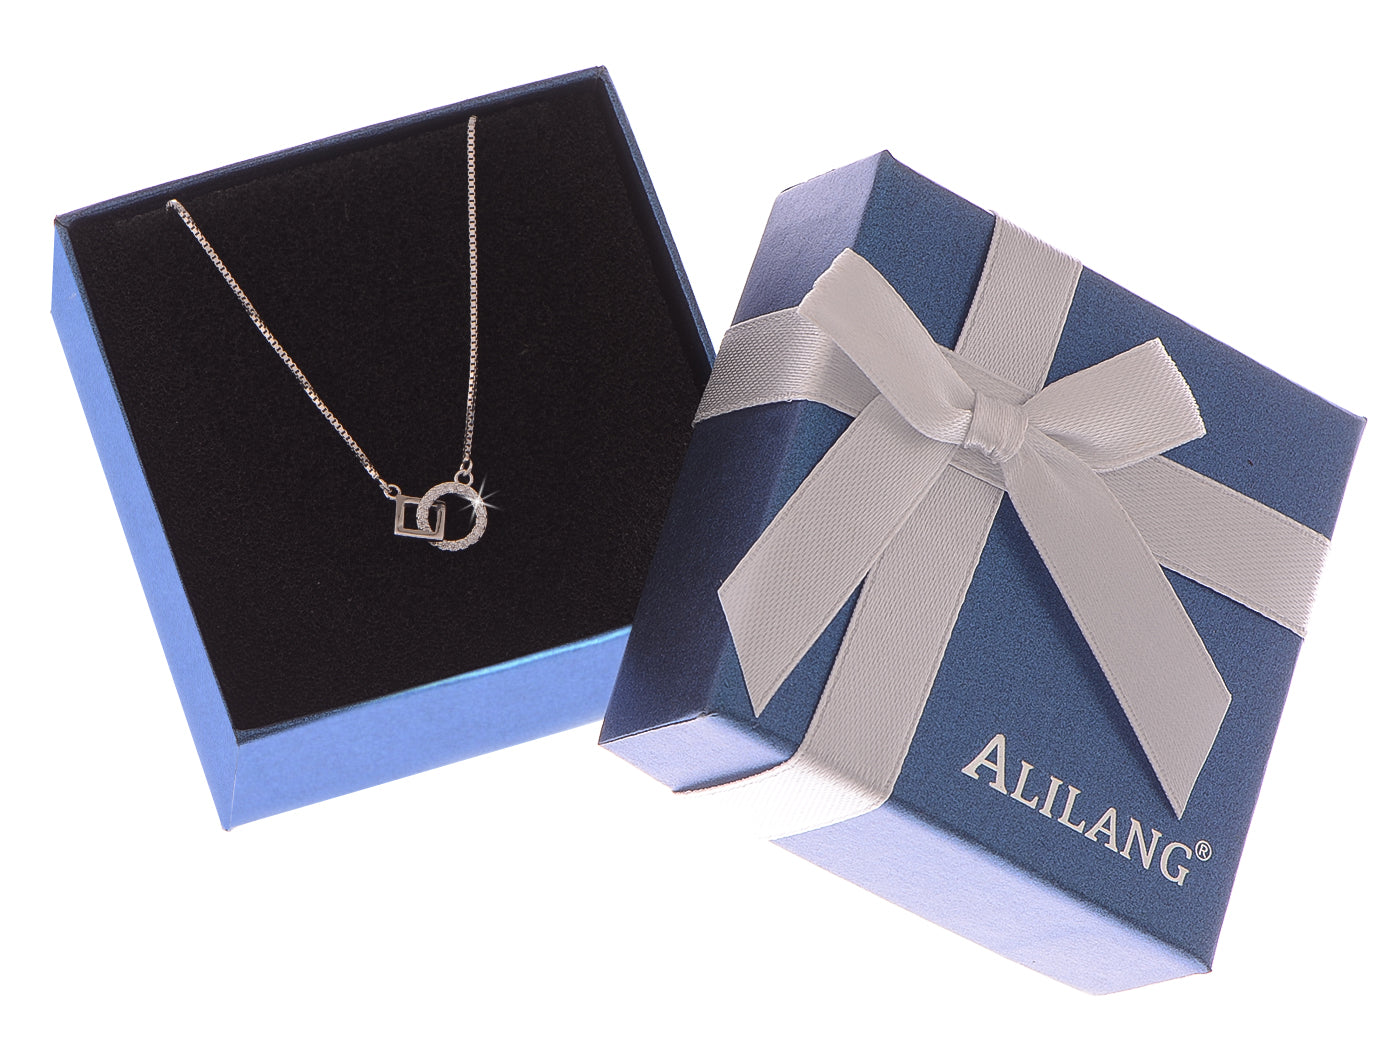 Alilang 925 Sterling Silver Necklace Square Circle Interlocking Necklace Geometric Pendant Necklace Dainty Jewelry Gifts for Women